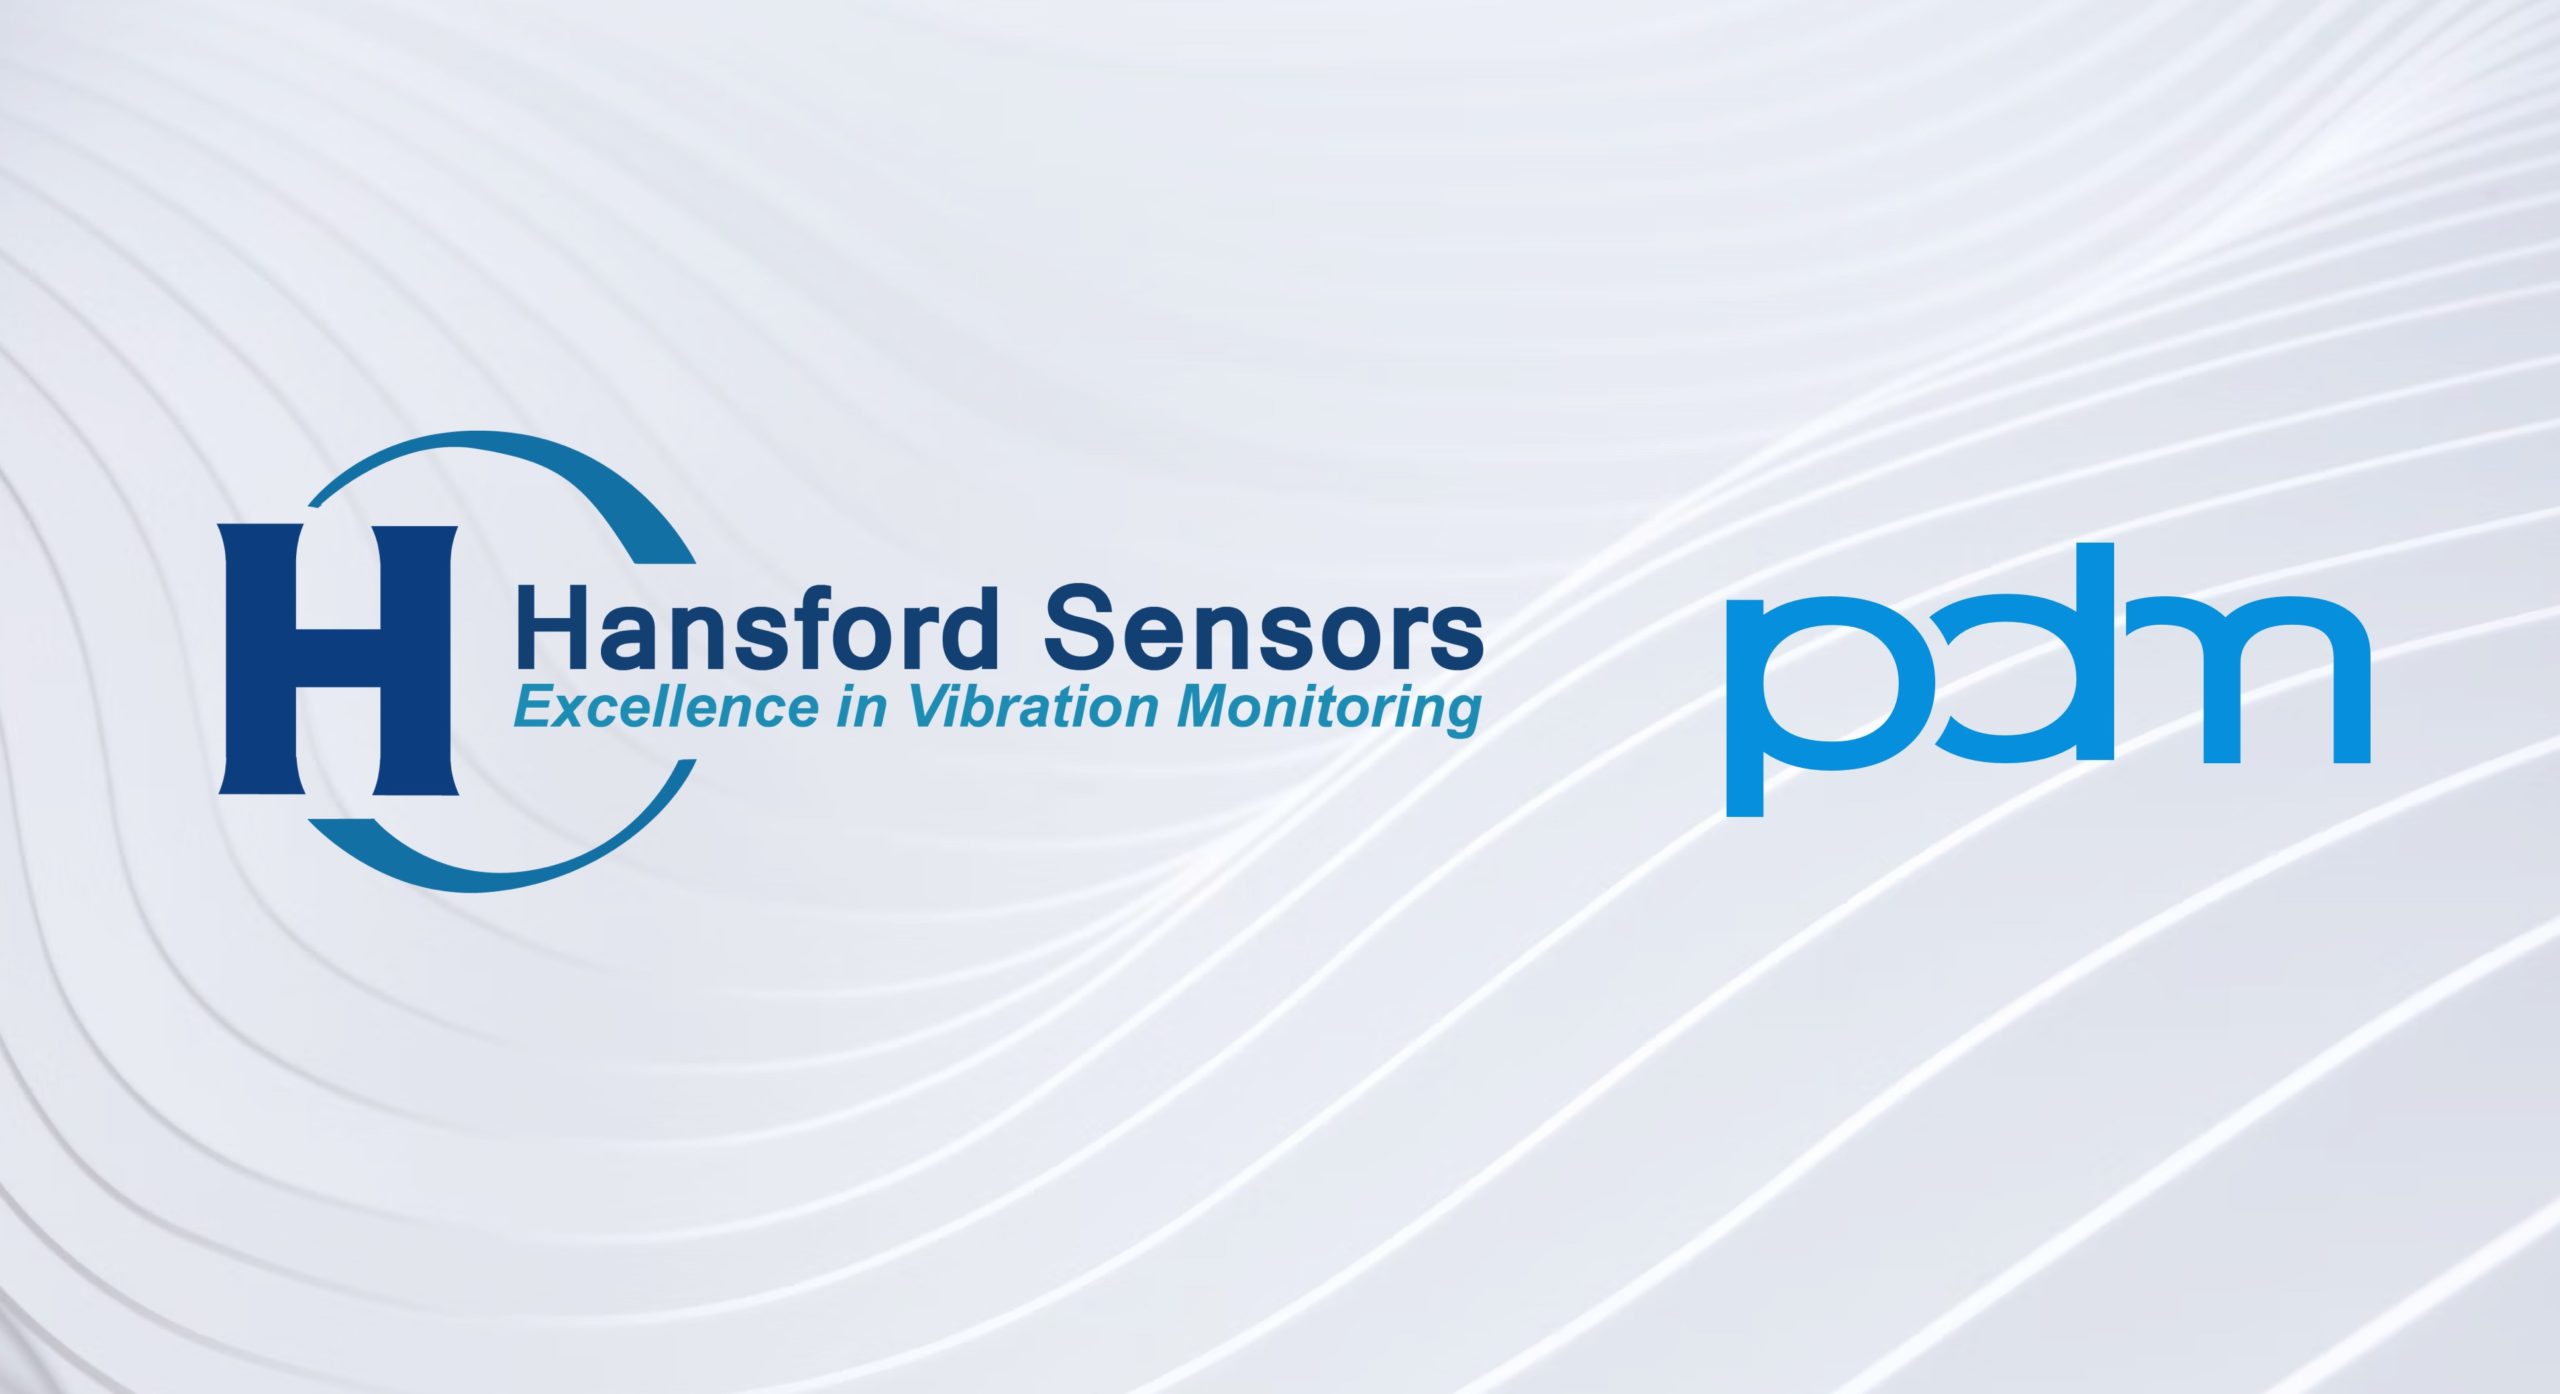 Our Relationship with Hansford Sensors